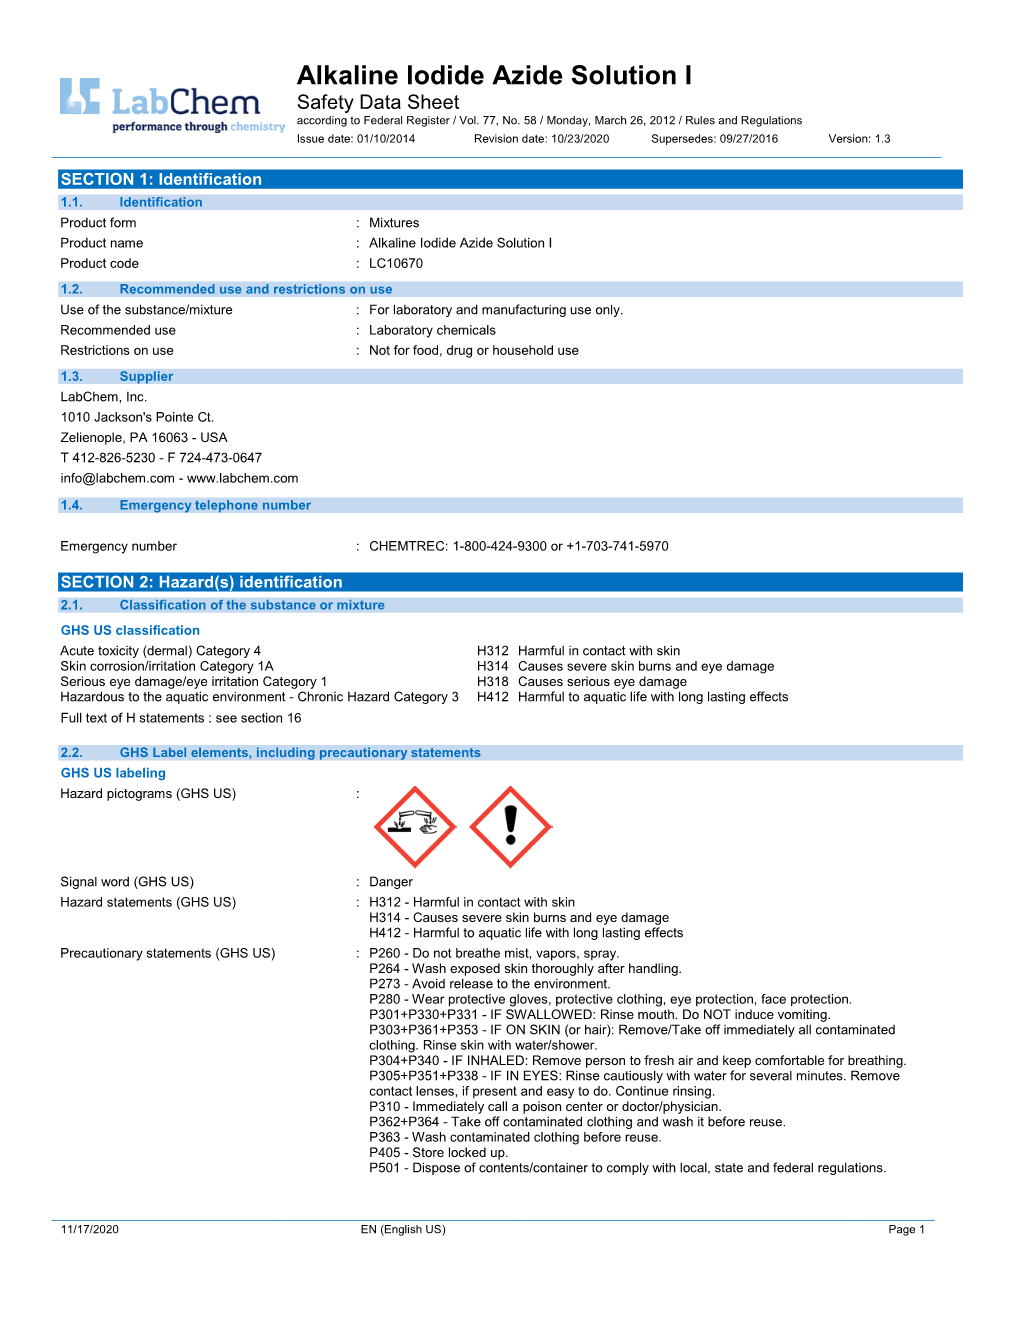 Alkaline Iodide Azide Solution I Safety Data Sheet According to Federal Register / Vol